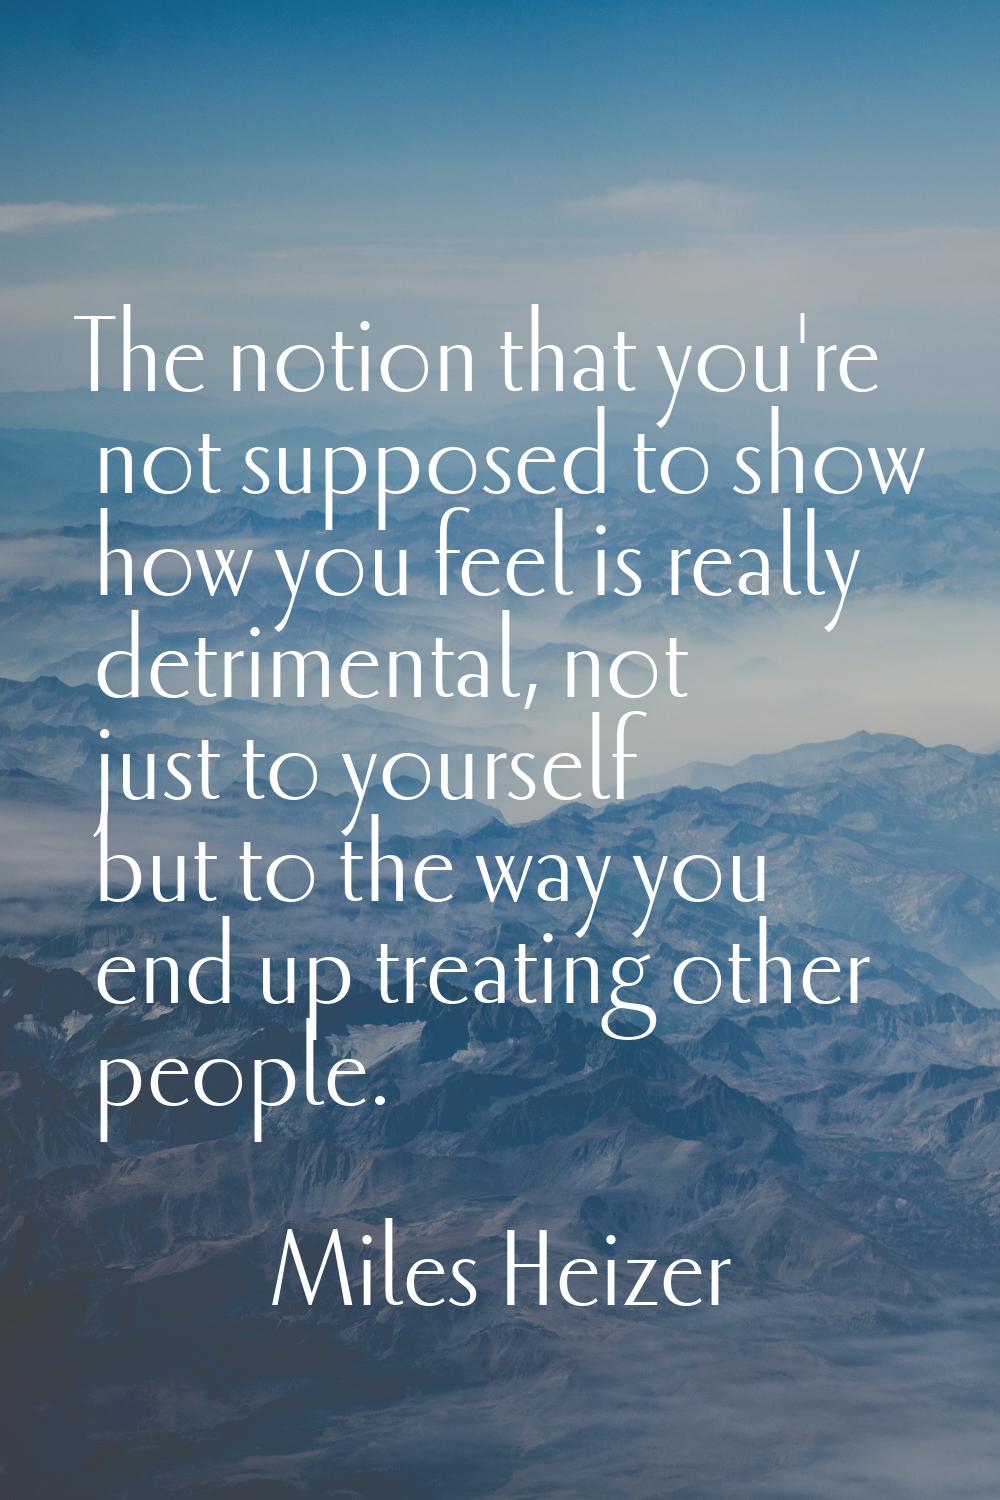 The notion that you're not supposed to show how you feel is really detrimental, not just to yoursel